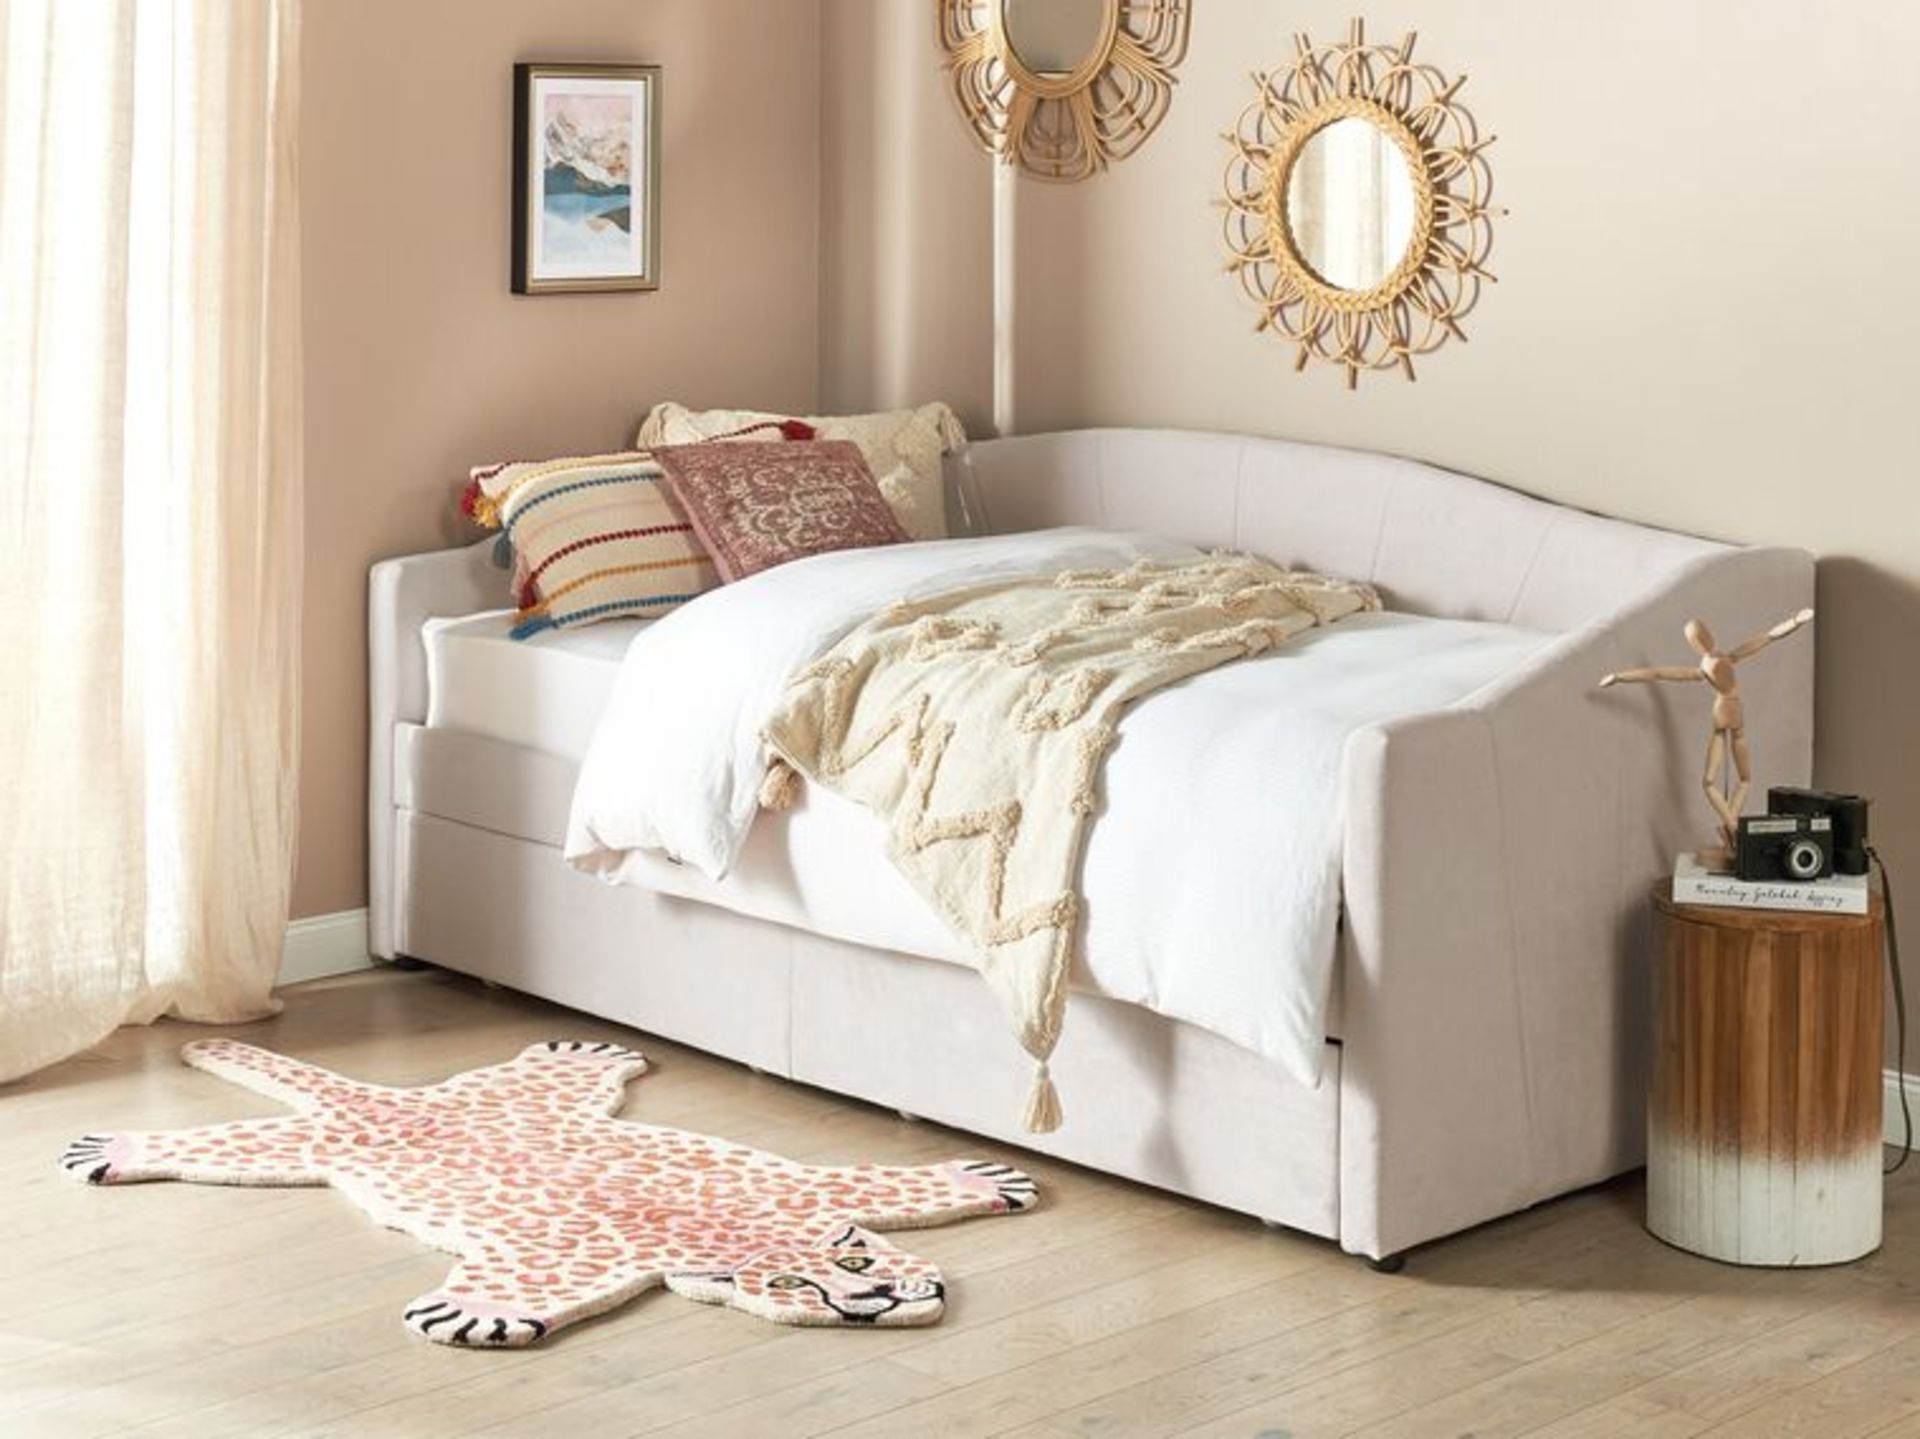 Vittel Fabric EU Single Daybed Light Beige. - R14. RRP £749.99. Discover timeless elegance with this